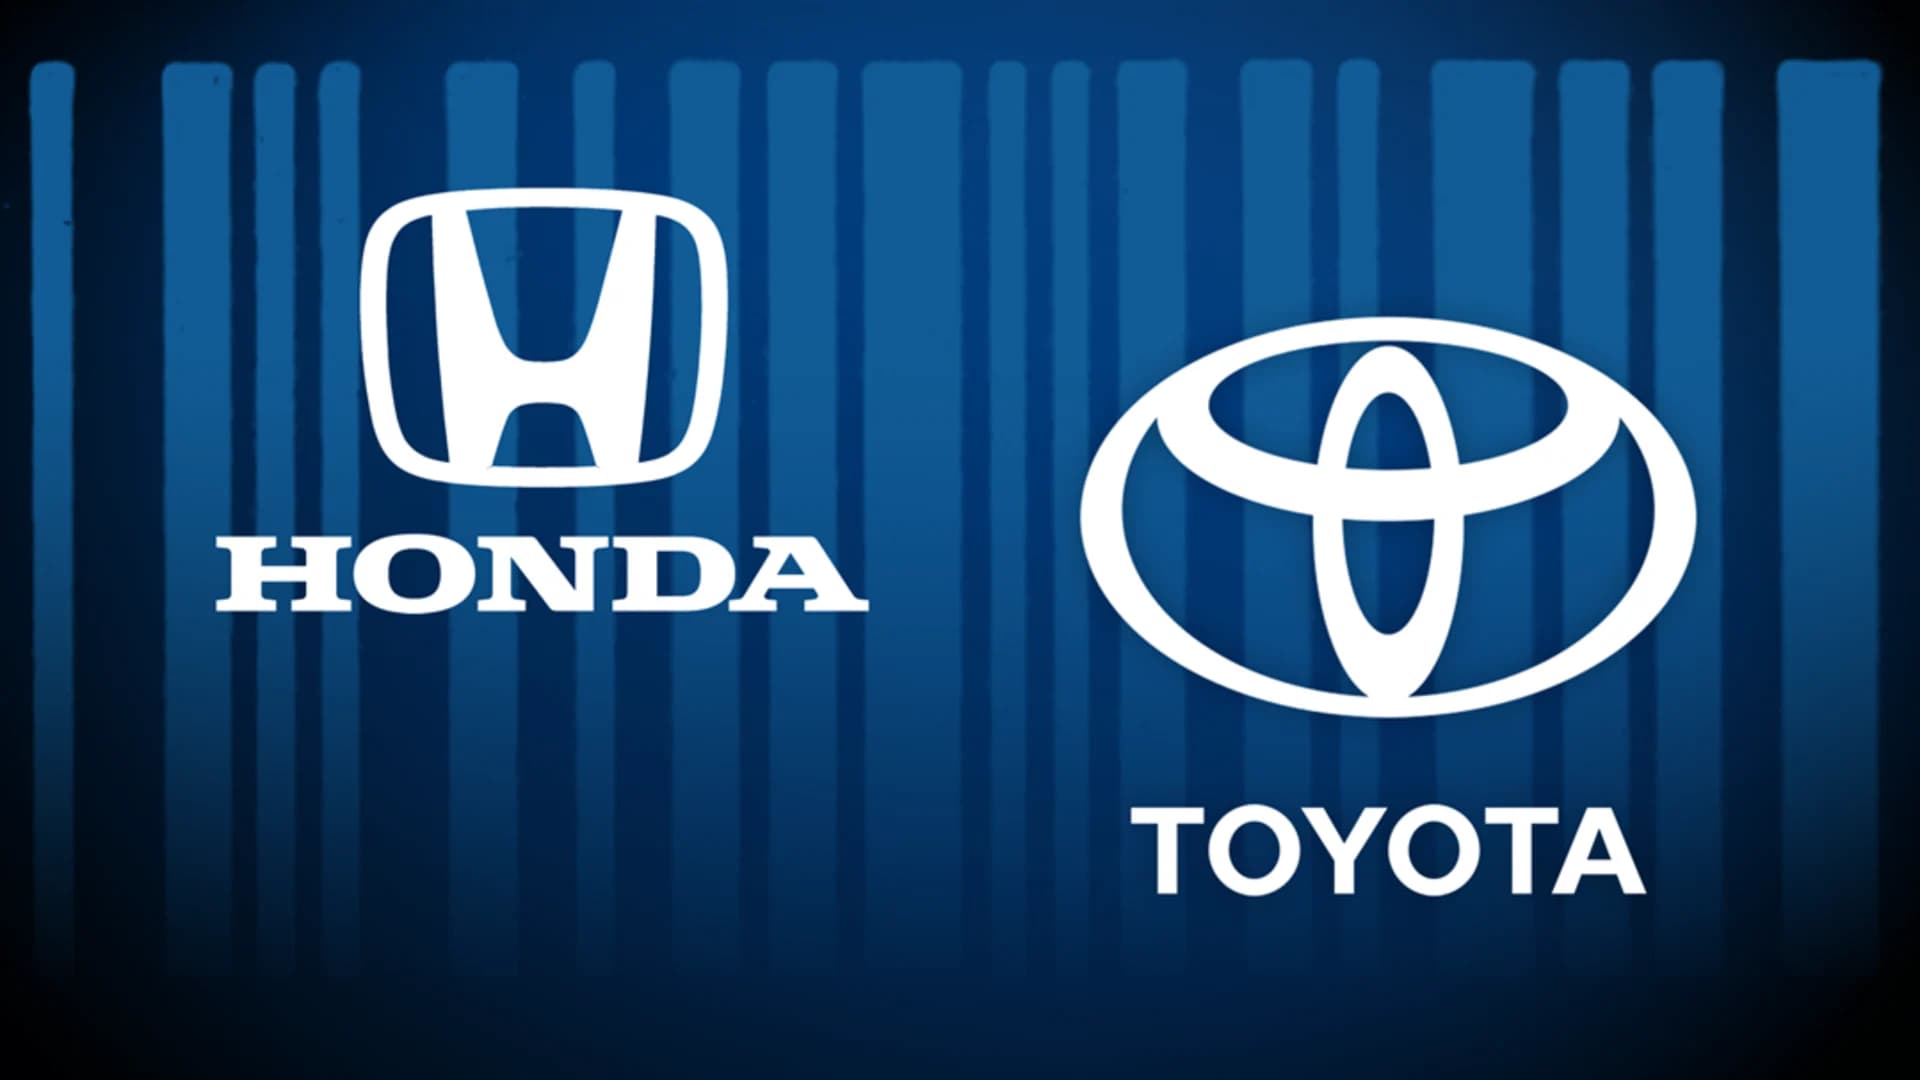 Toyota, Honda recall millions of vehicles over unrelated safety issues